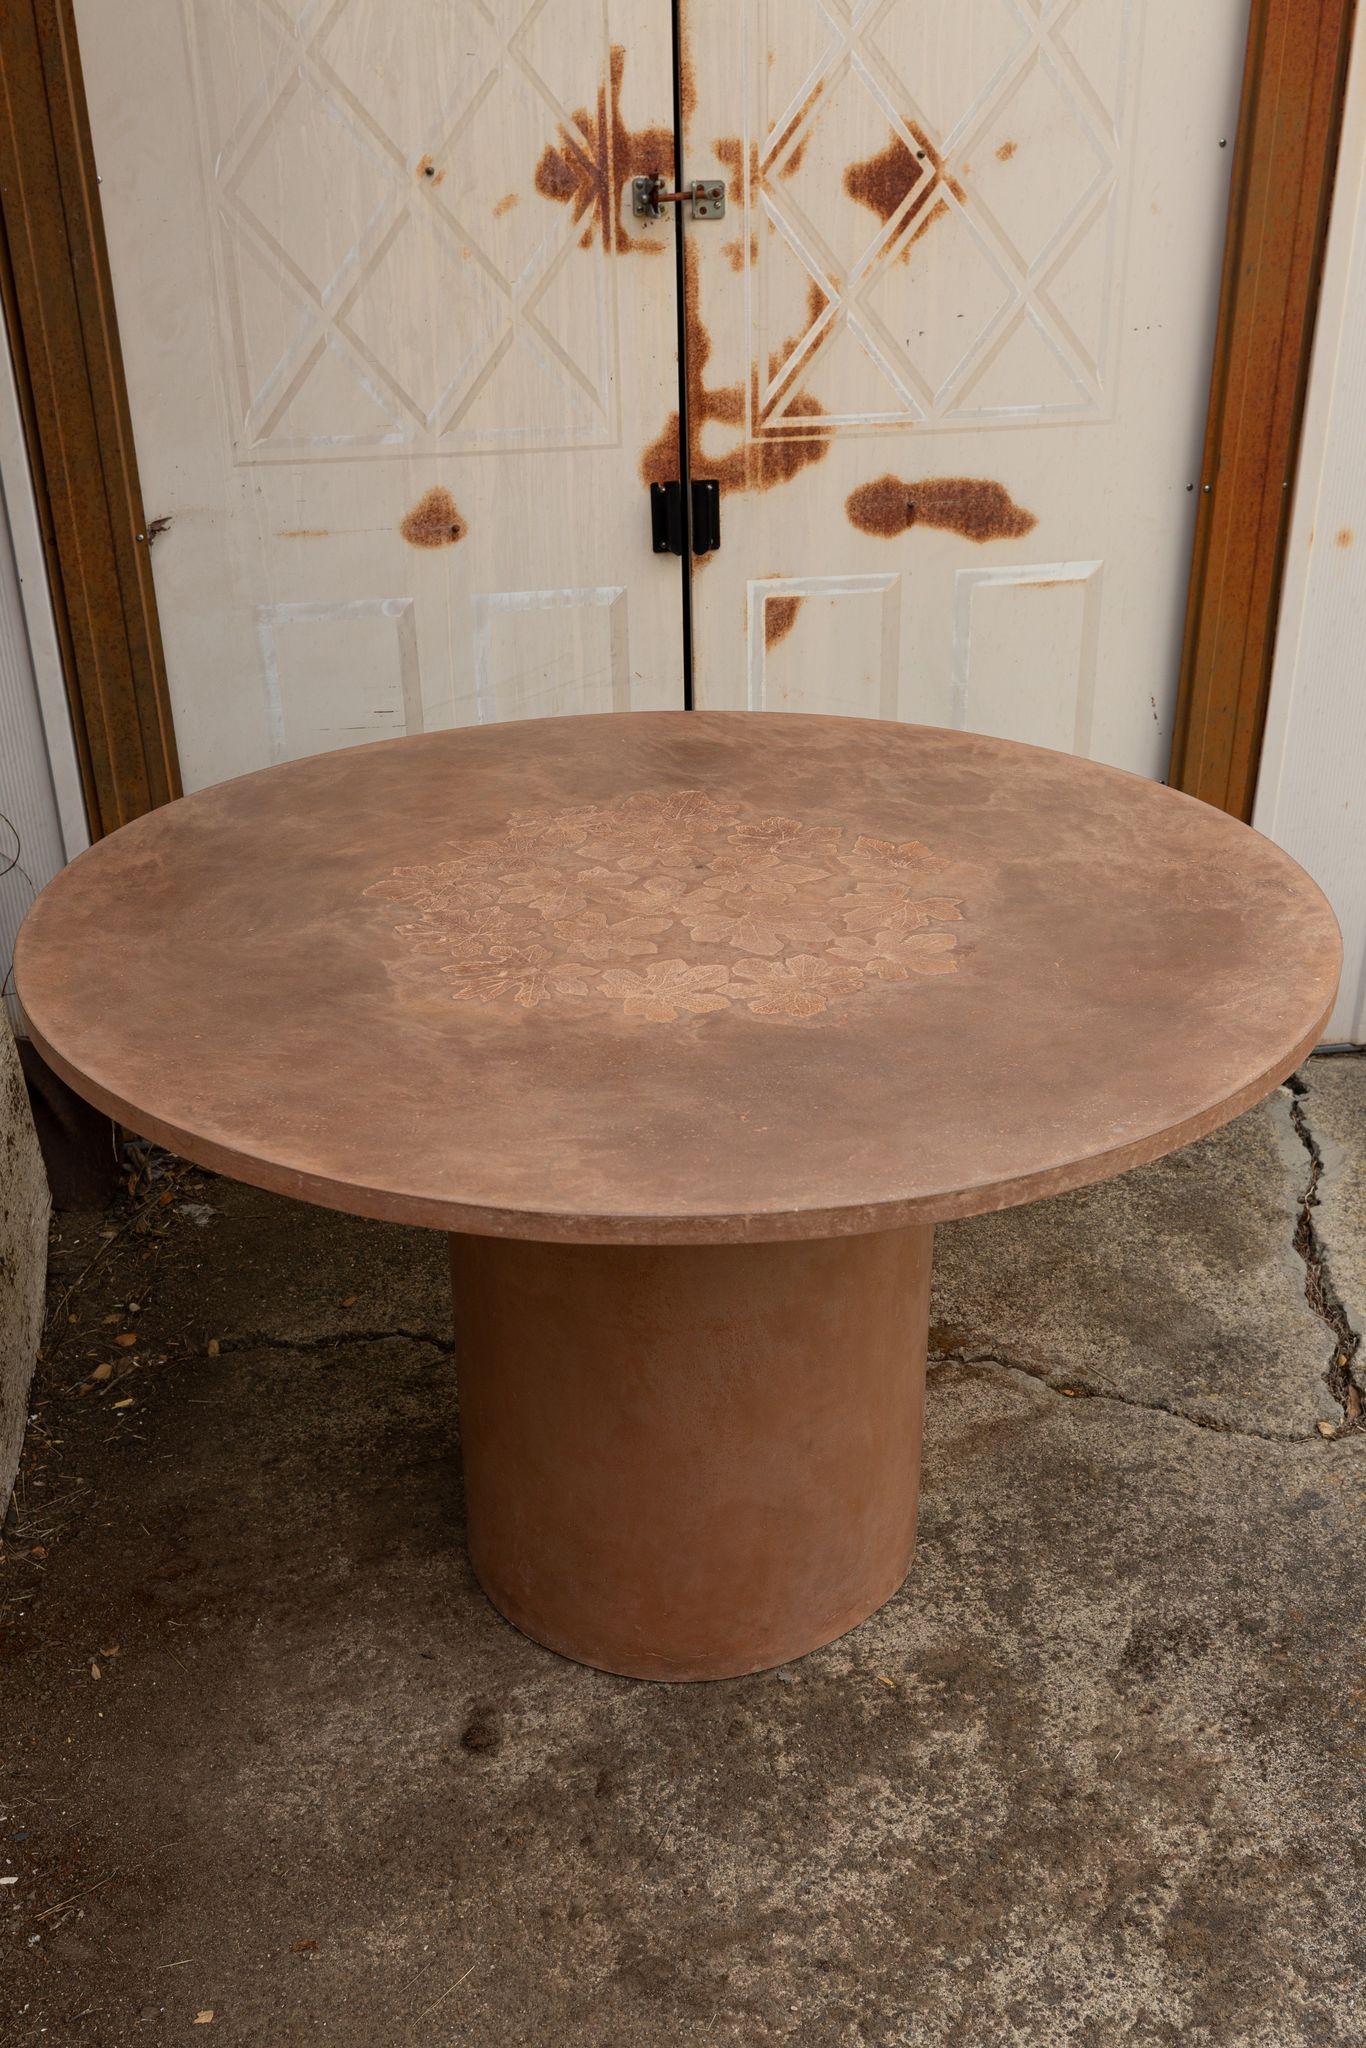 American Customizable Concrete Round Pillar Dining Tables For Sale